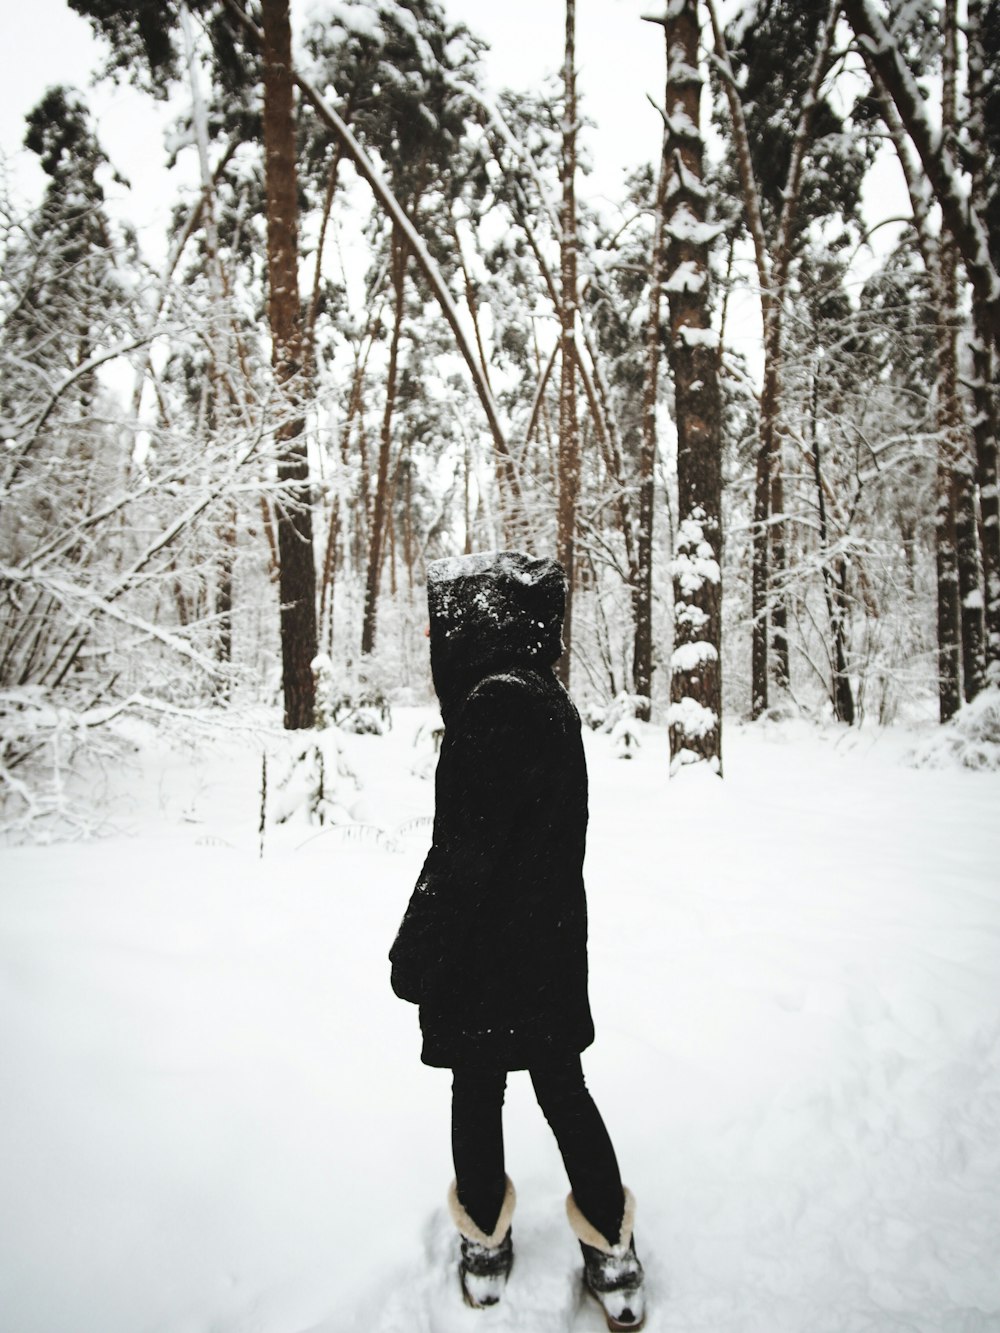 person wearing black coat standing near trees